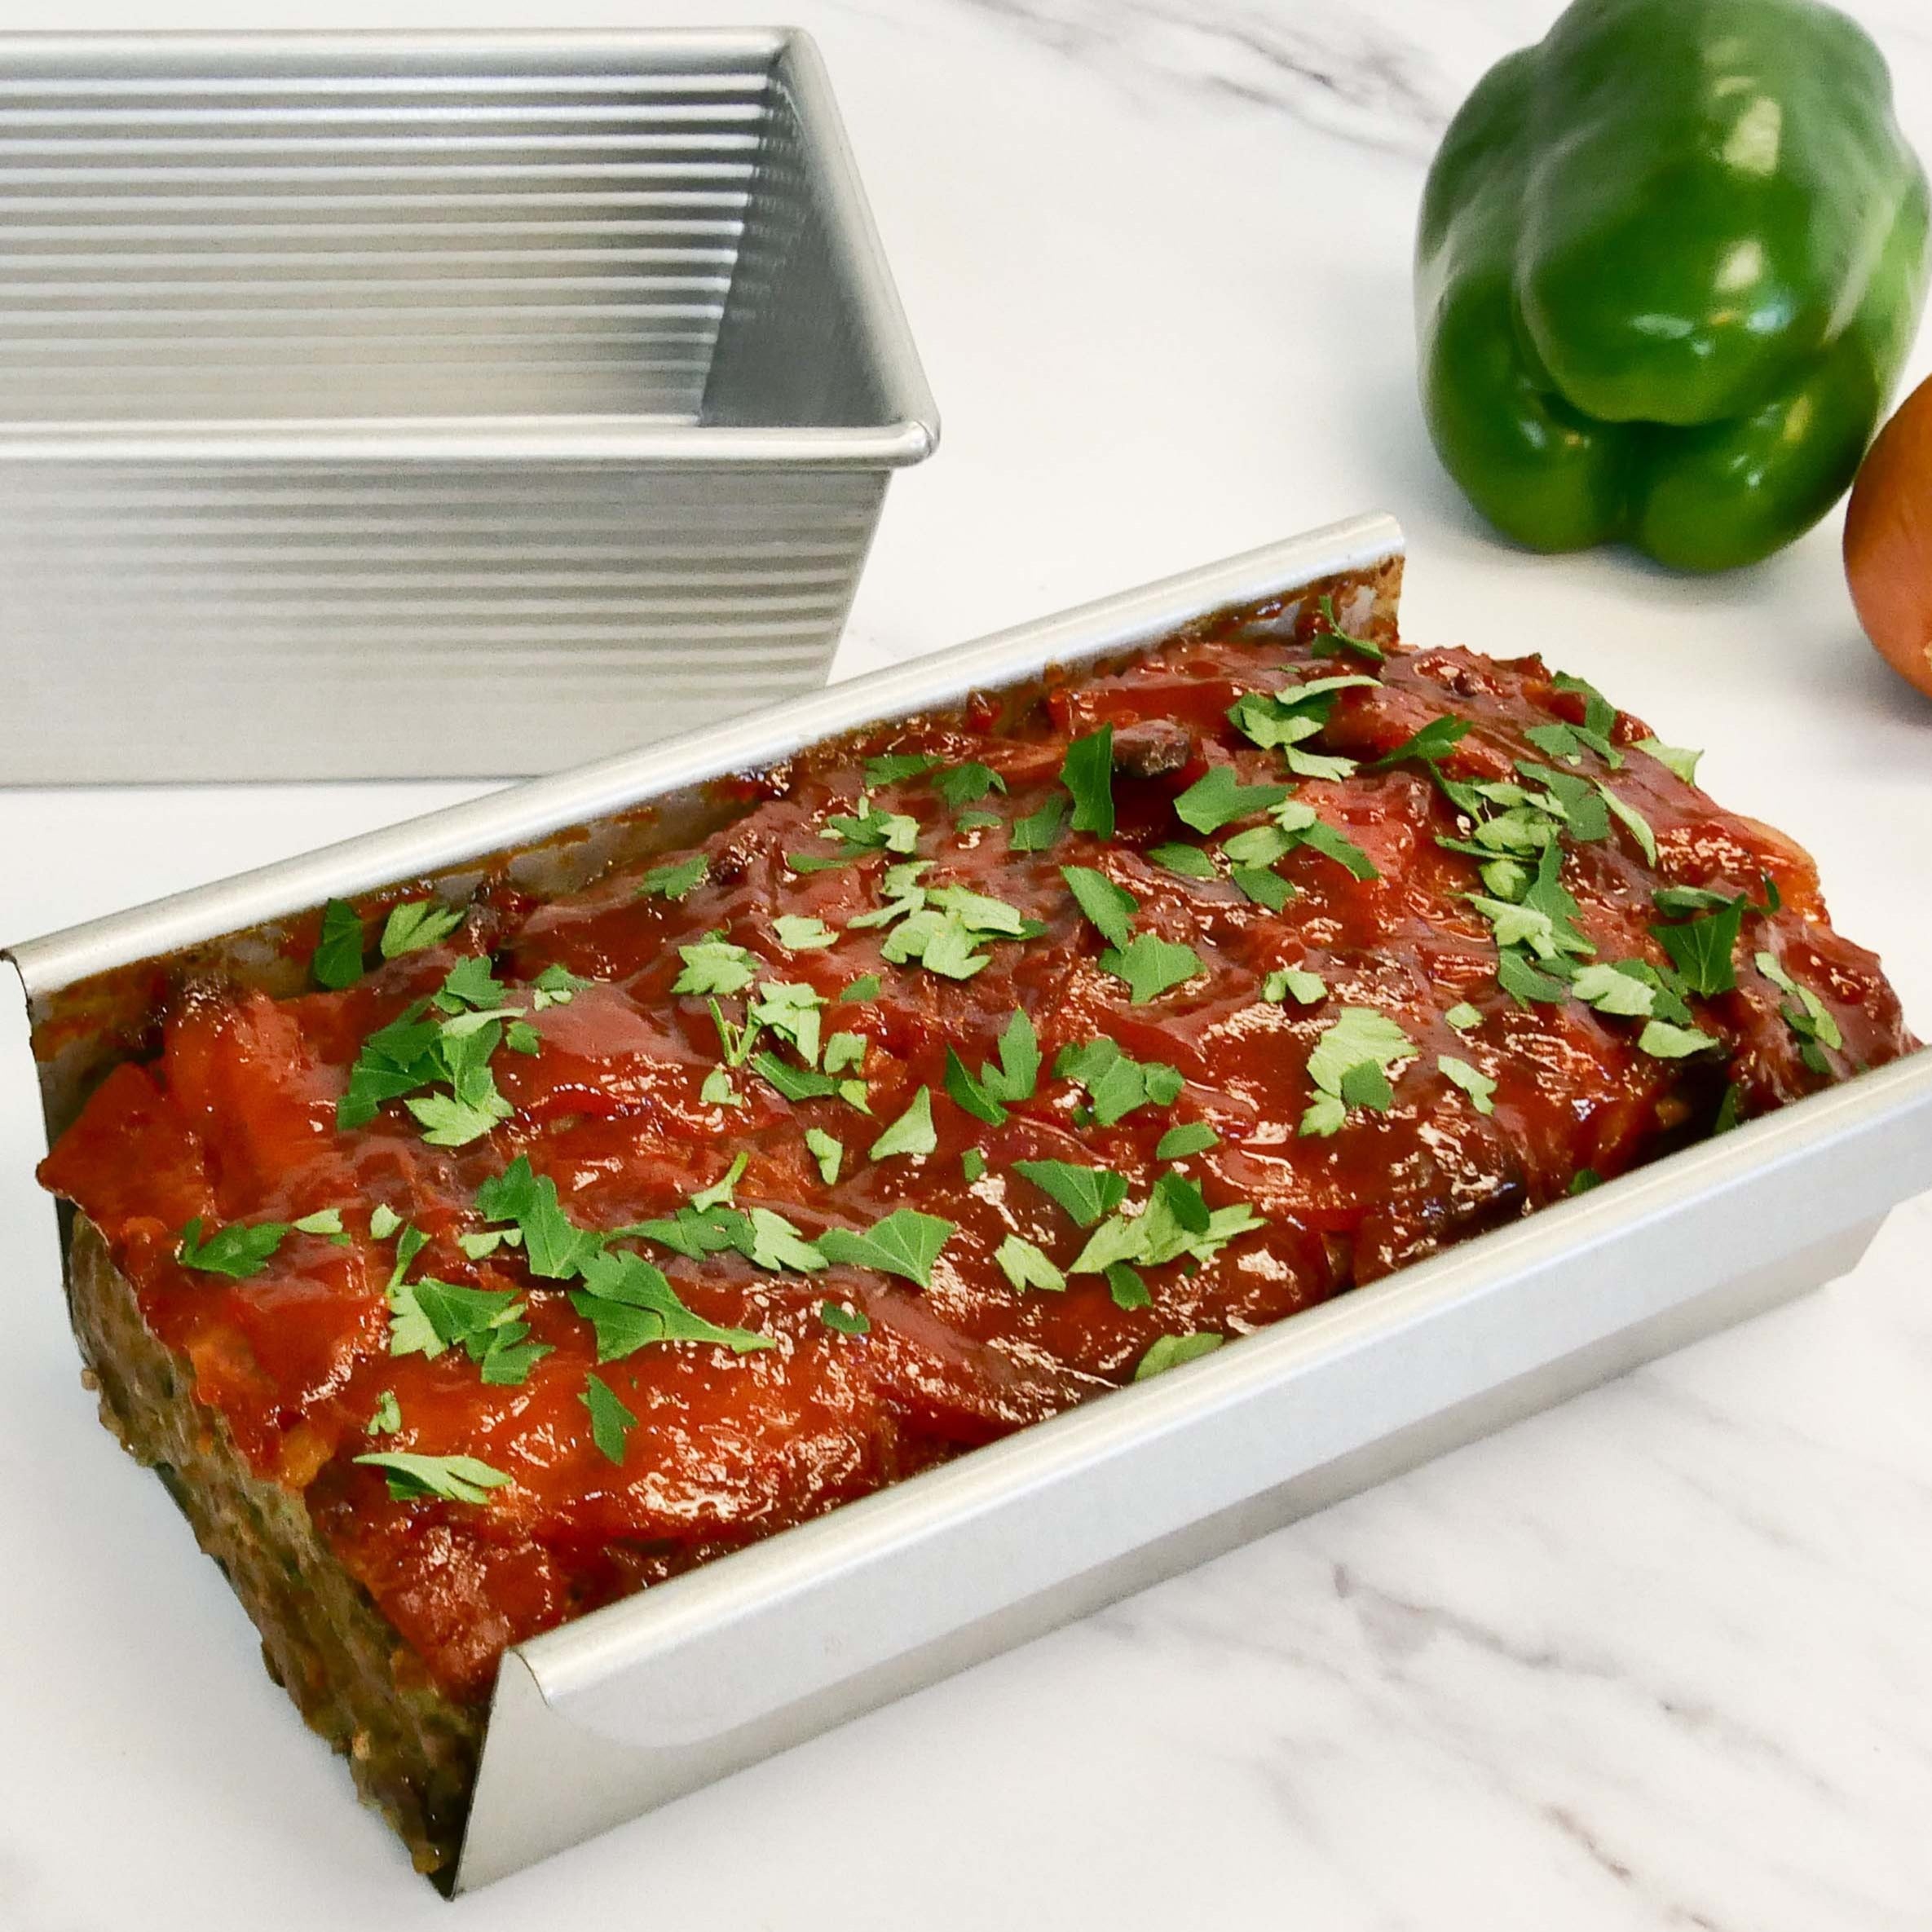 USA Meatloaf Pan with meatloaf in insert